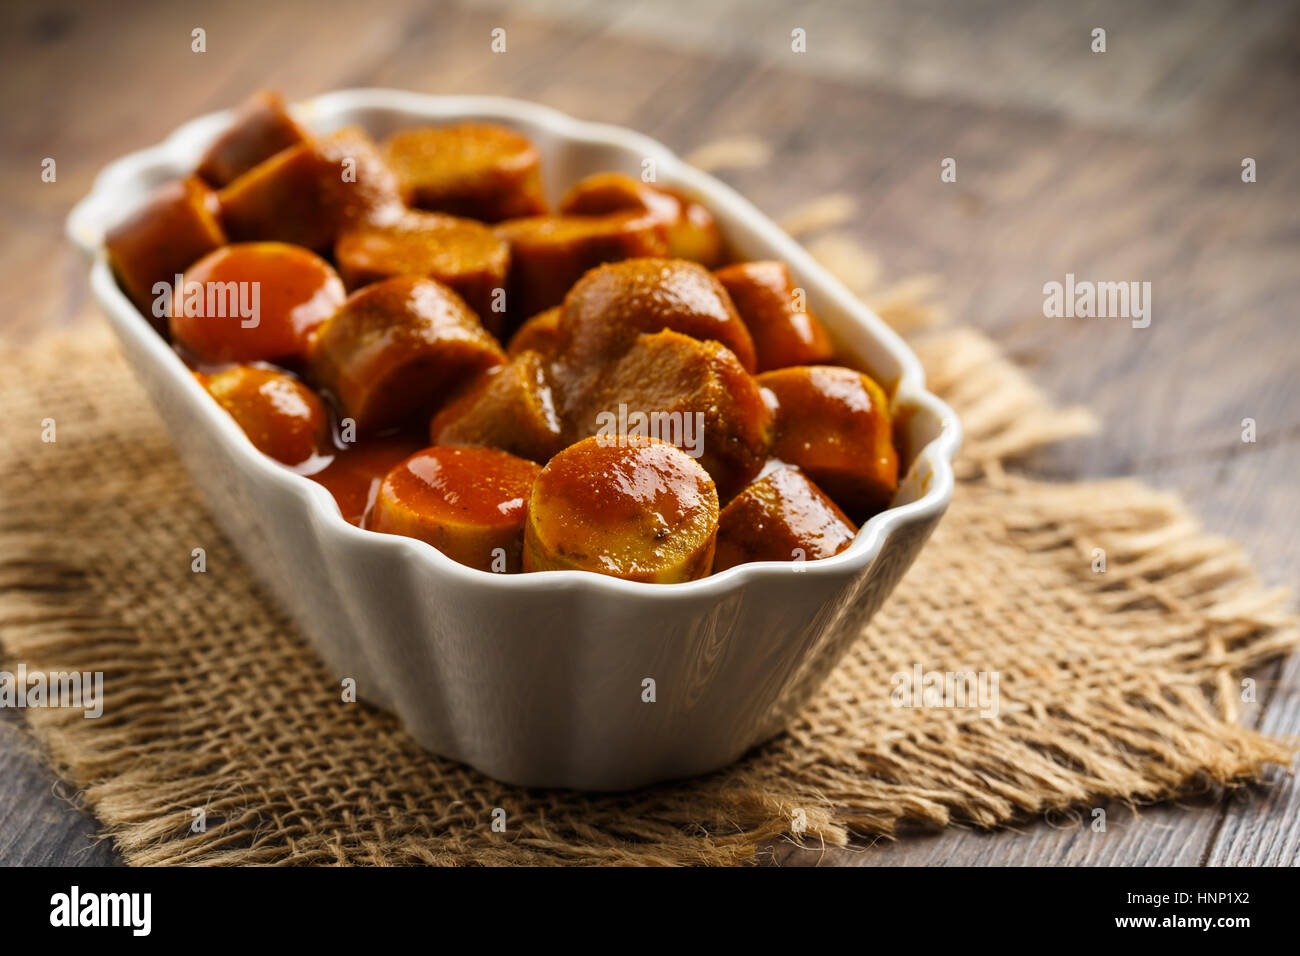 german currywurst - pieces of curried sausage Stock Photo